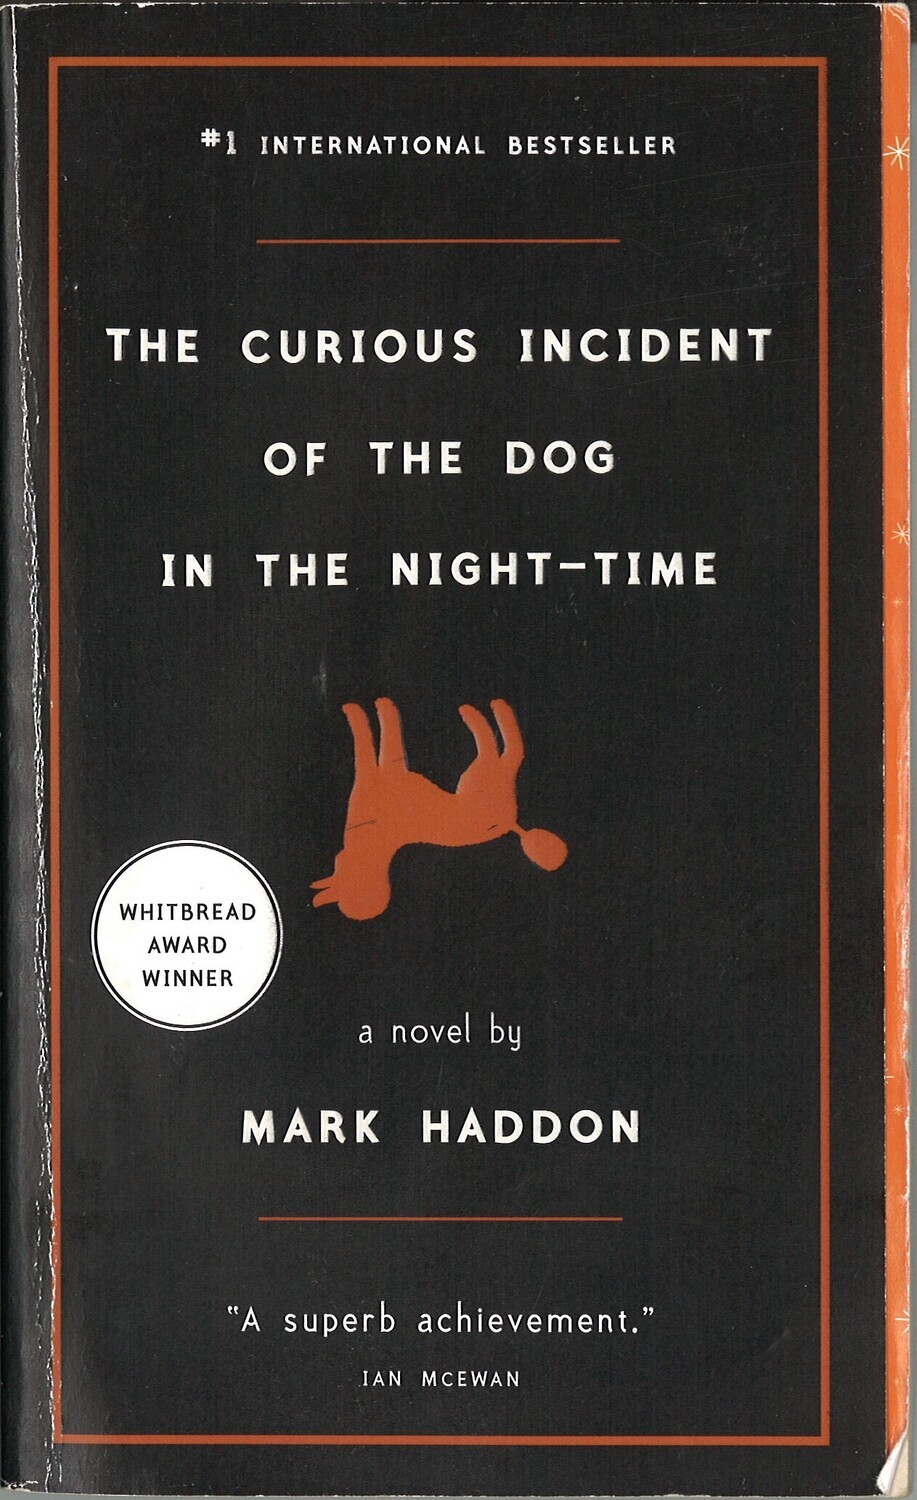 The Curious Incident of The Dog in the Night-Time